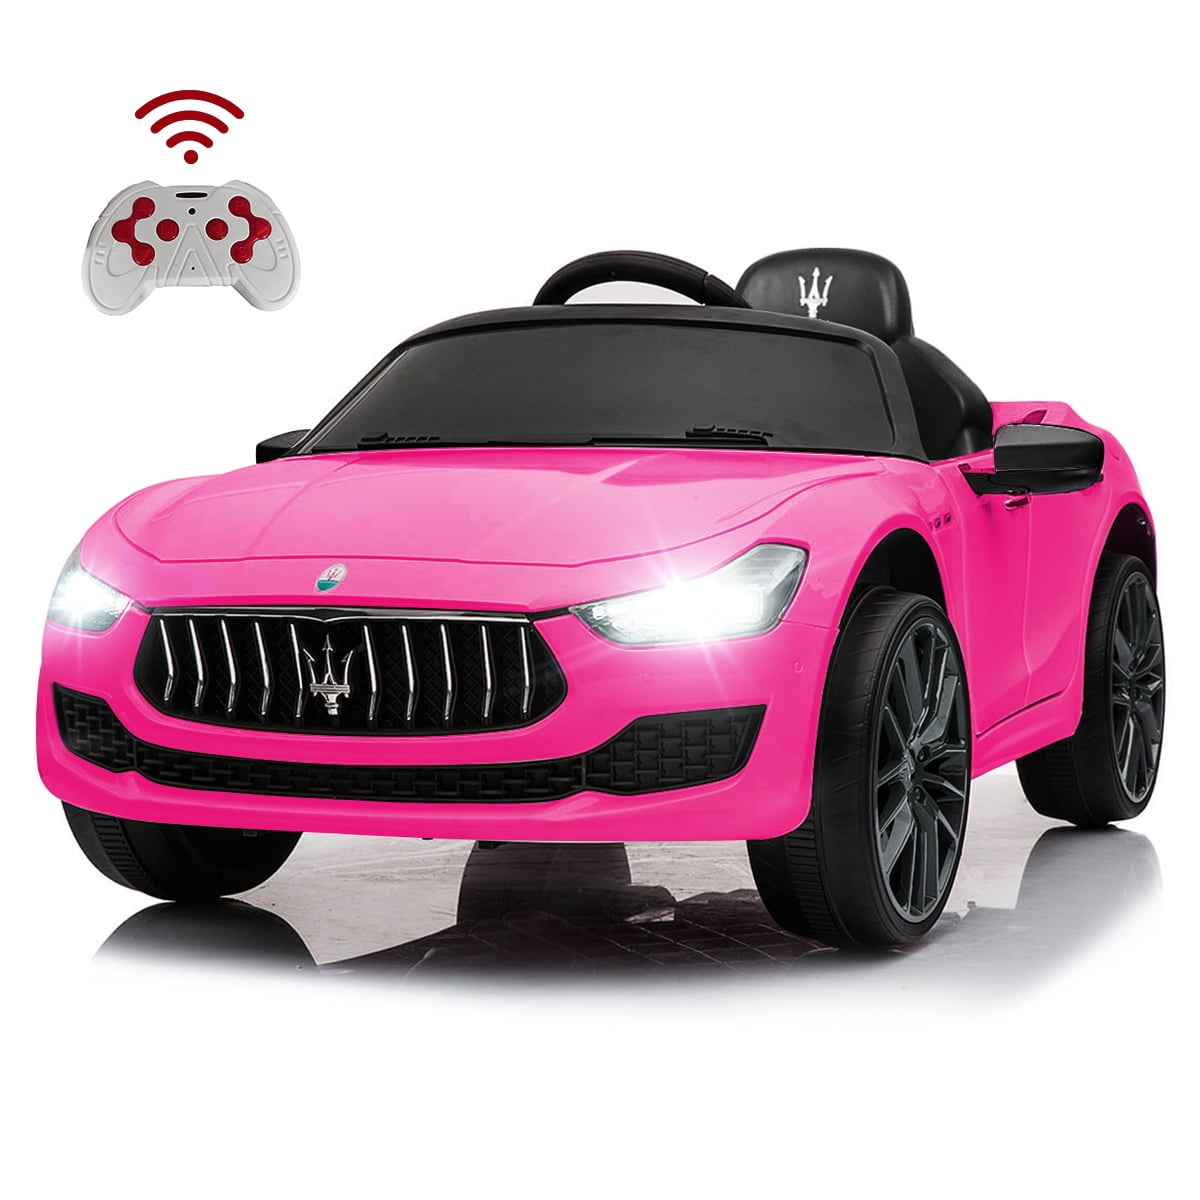 12v Rechargeable Kids Ride on Car Maserati Toy Vehicle Remote Control Mp3 Black for sale online 